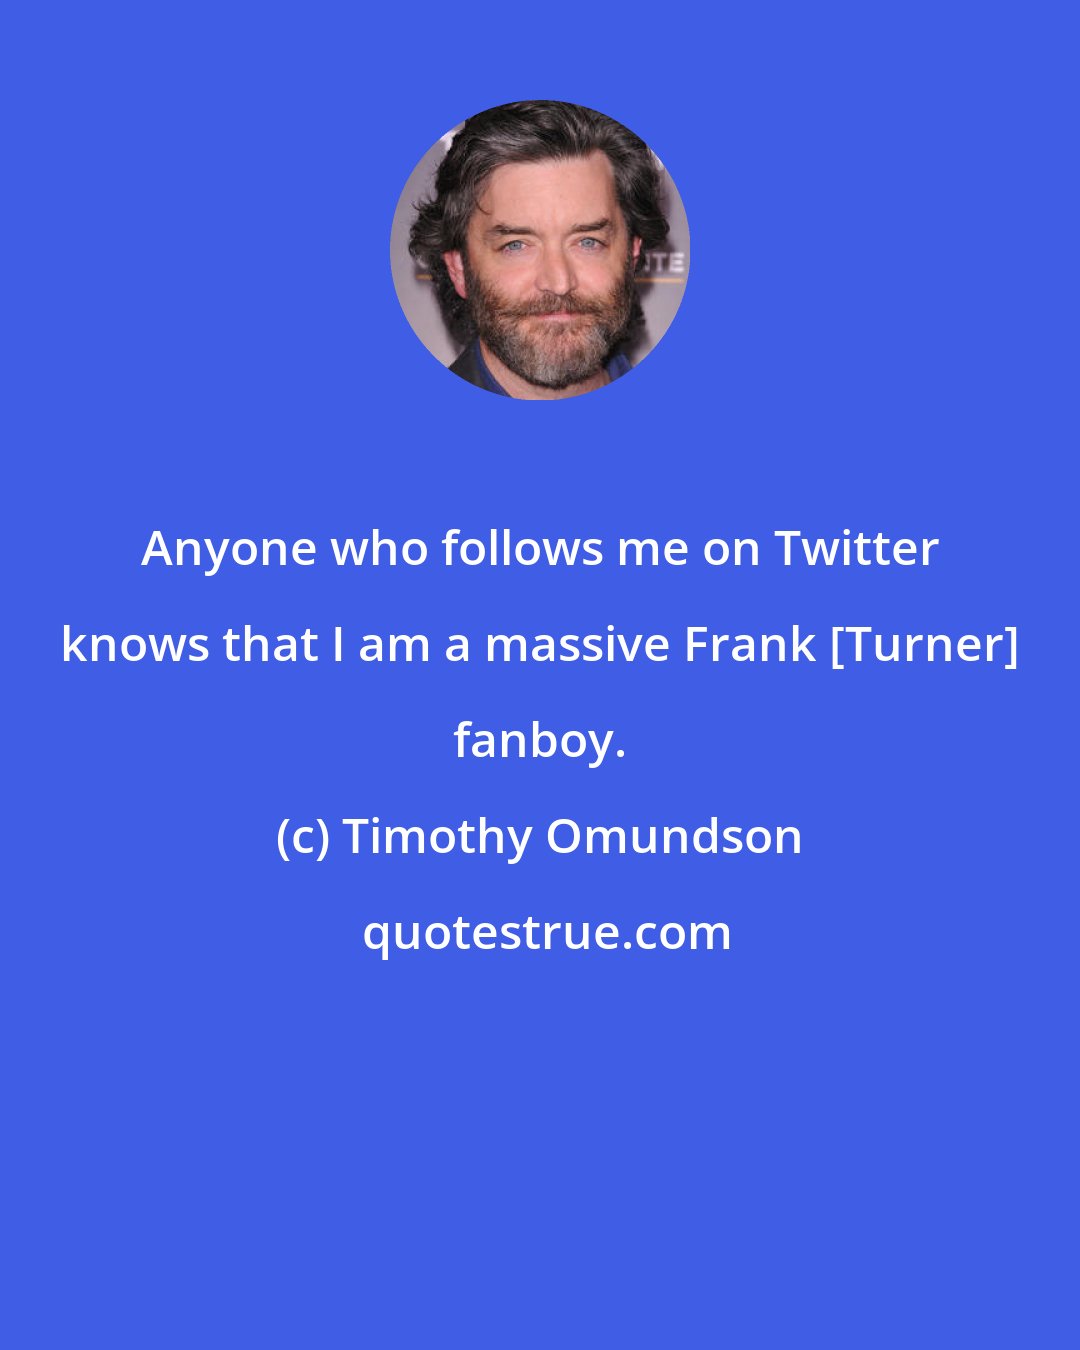 Timothy Omundson: Anyone who follows me on Twitter knows that I am a massive Frank [Turner] fanboy.